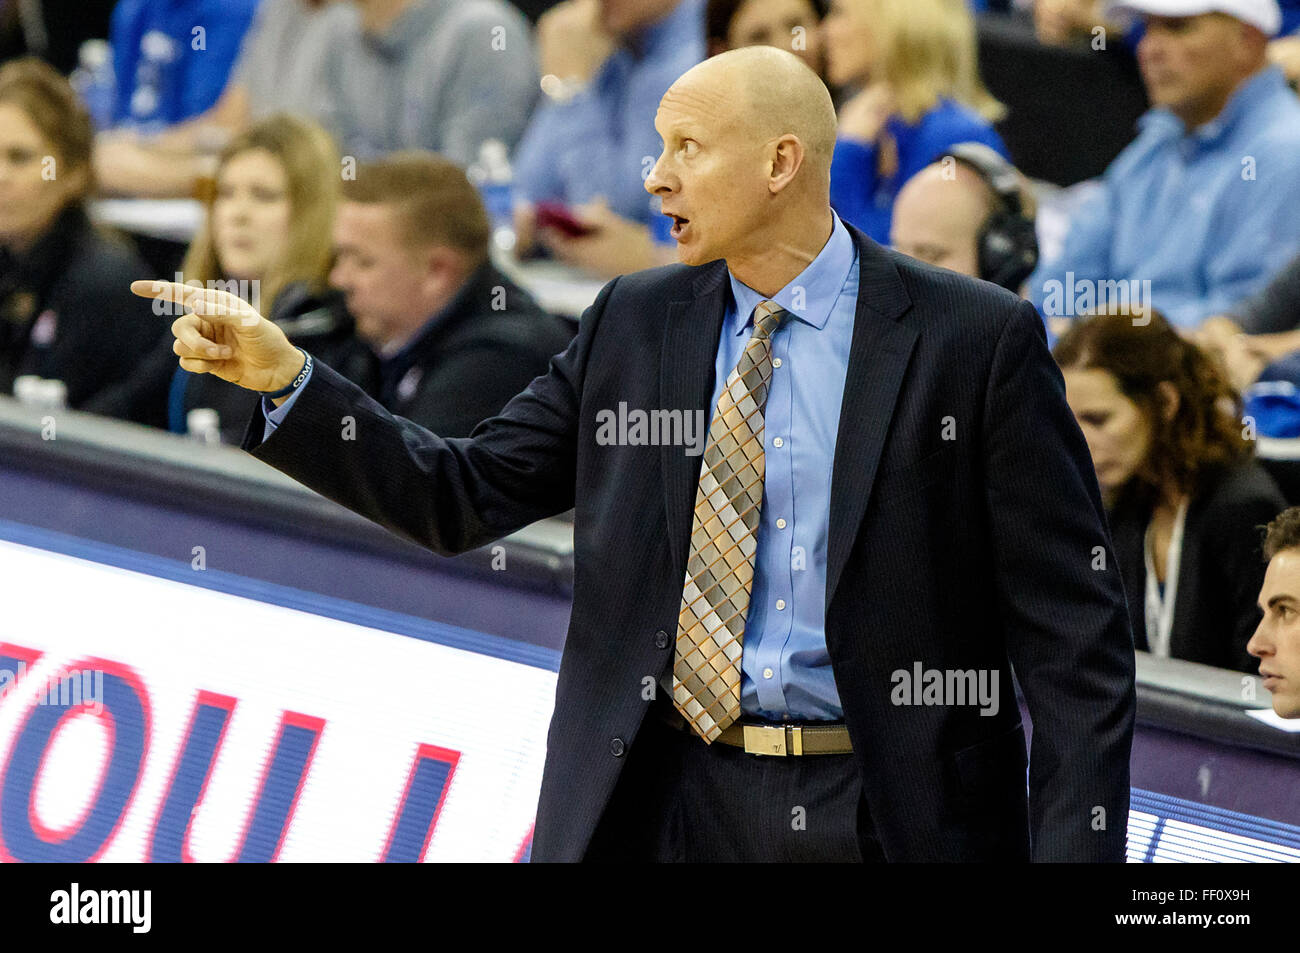 Omaha, NE USA. 09th Feb, 2016. Xavier Musketeers head coach Chris Mack in action during an NCAA men's basketball game between #5 Xavier Musketeers and Creighton Bluejays at CenturyLink Center in Omaha, NE.Attendance: 17,071.Creighton won 70-56.Michael Spomer/Cal Sport Media/Alamy Live News Stock Photo